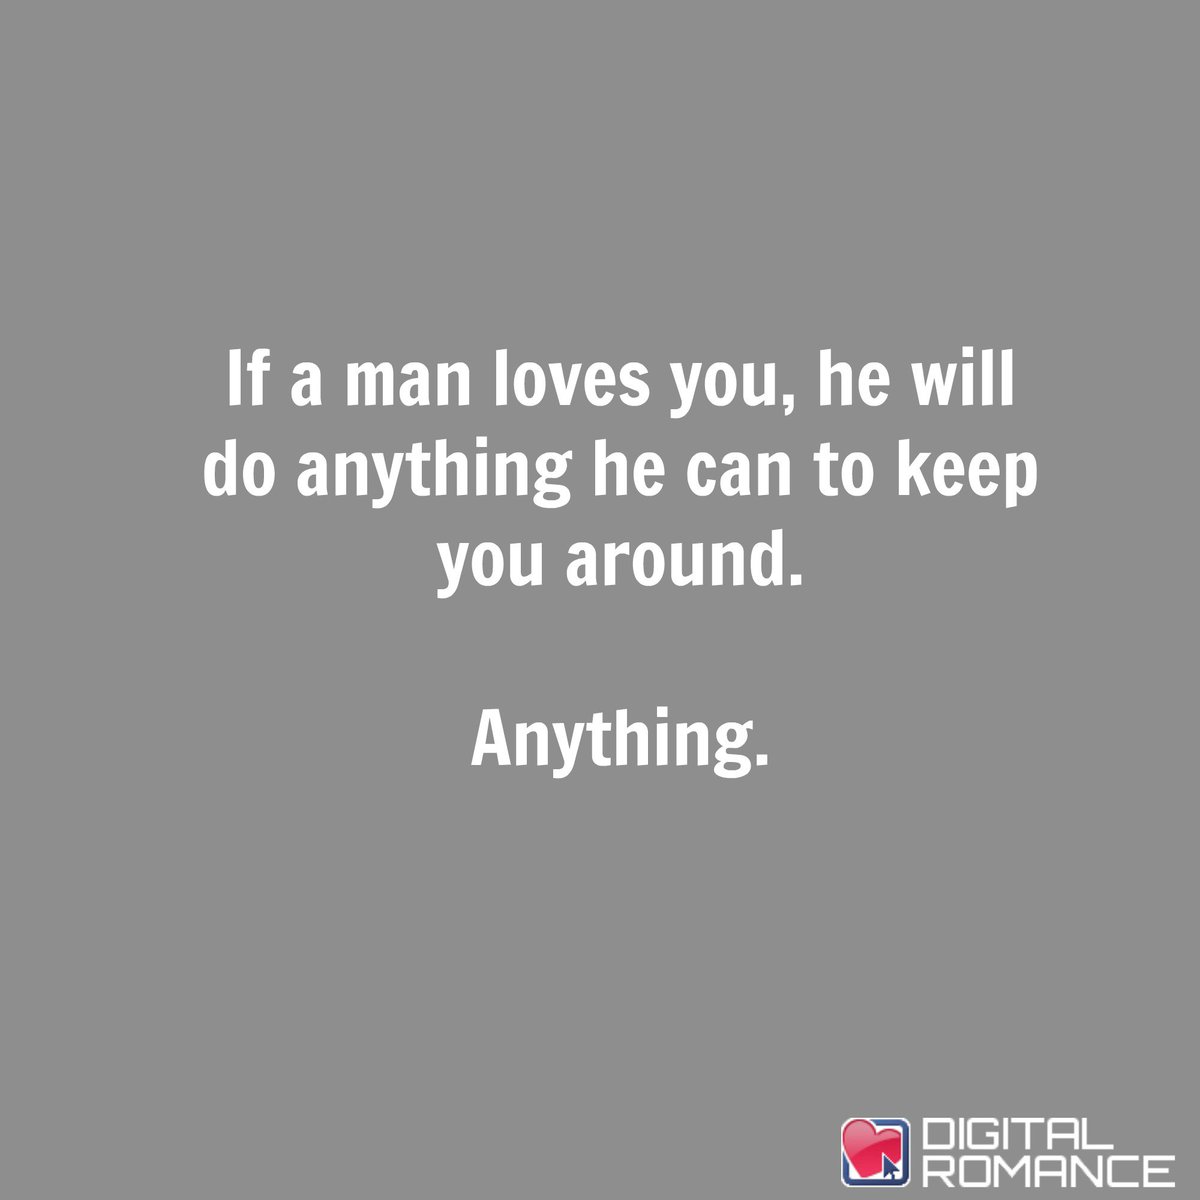 Digital Romance Inc on Twitter "If a man loves you he will do anything he can to keep you around Anything love quotes